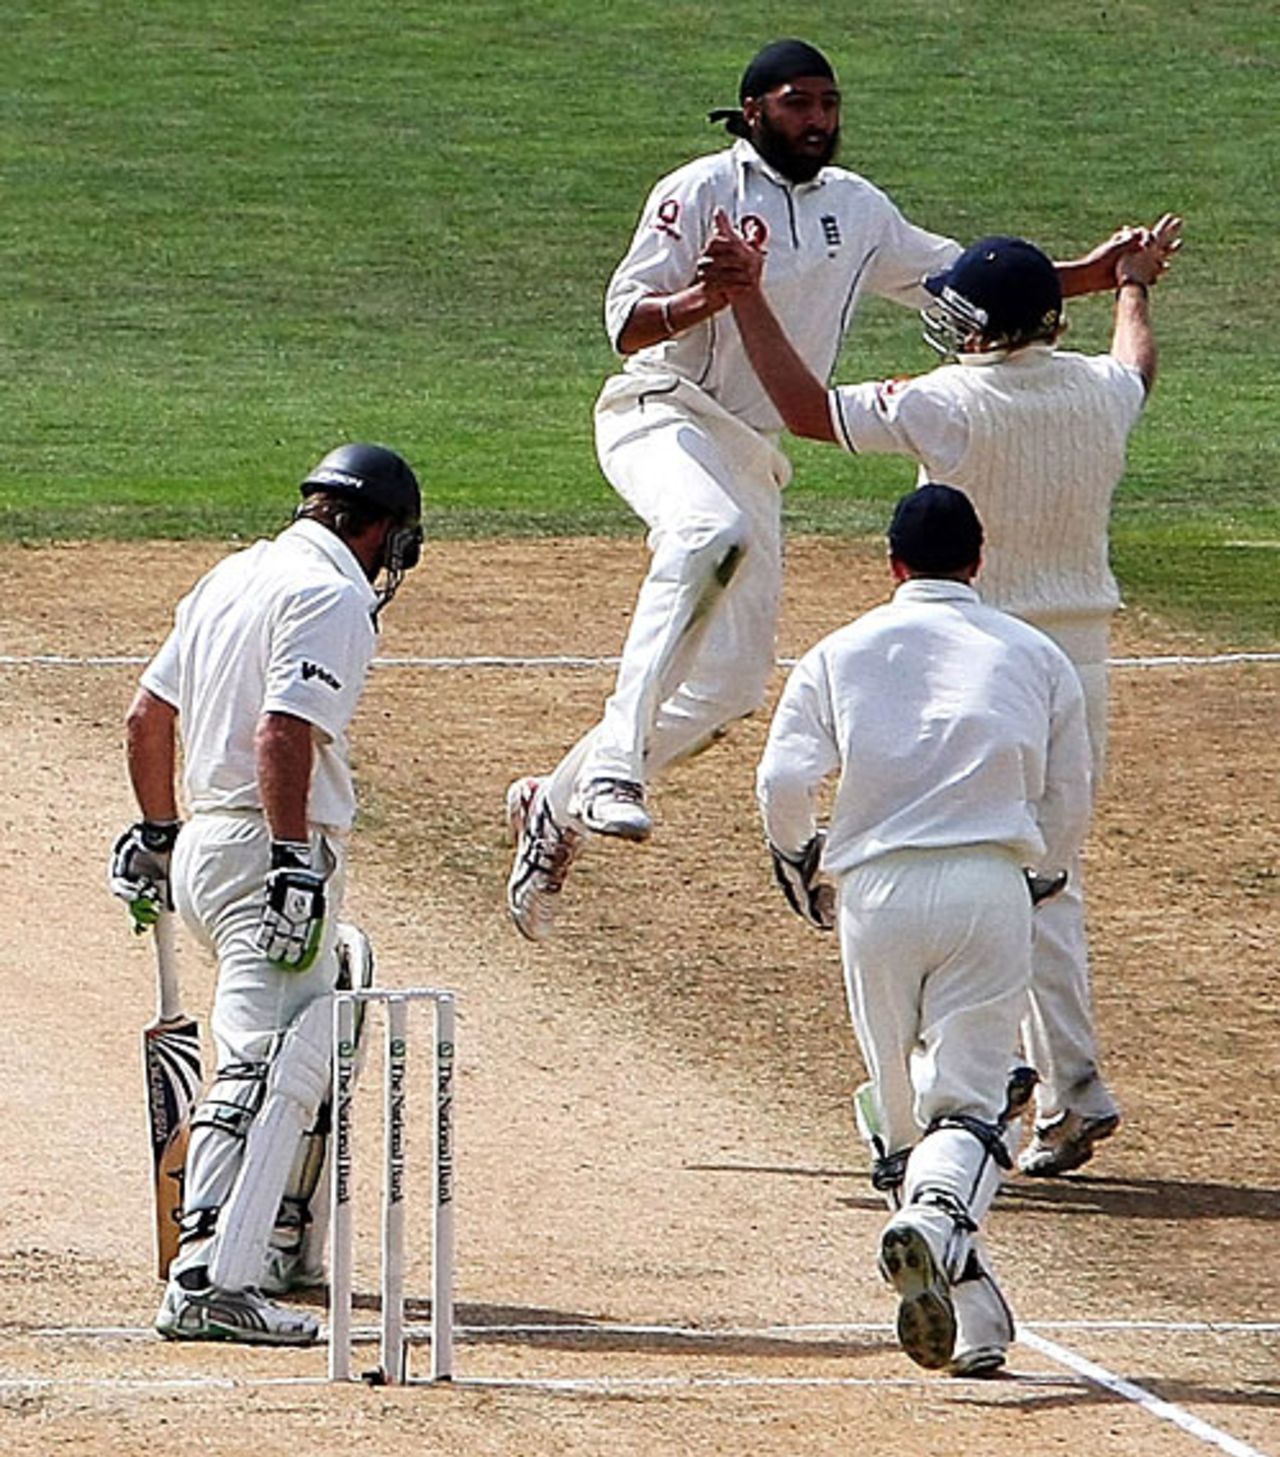 Monty Panesar skips and jumps to celebrate the breakthrough wicket of Jamie How, New Zealand v England, 3rd Test, Napier, March 25, 2008